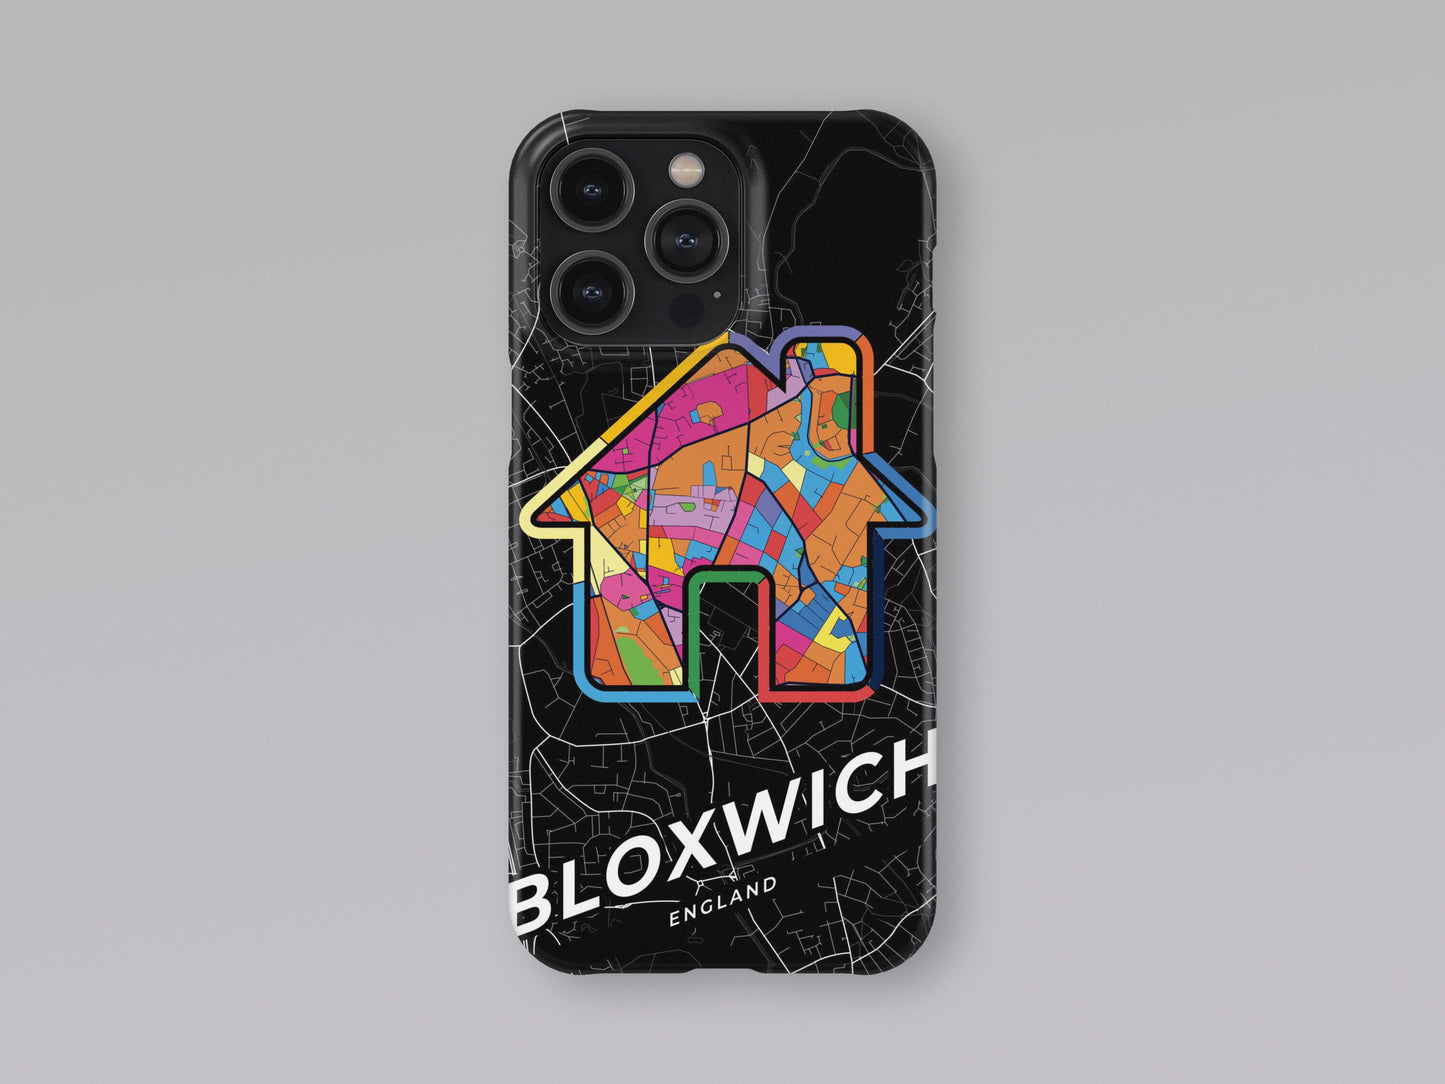 Bloxwich England slim phone case with colorful icon. Birthday, wedding or housewarming gift. Couple match cases. 3